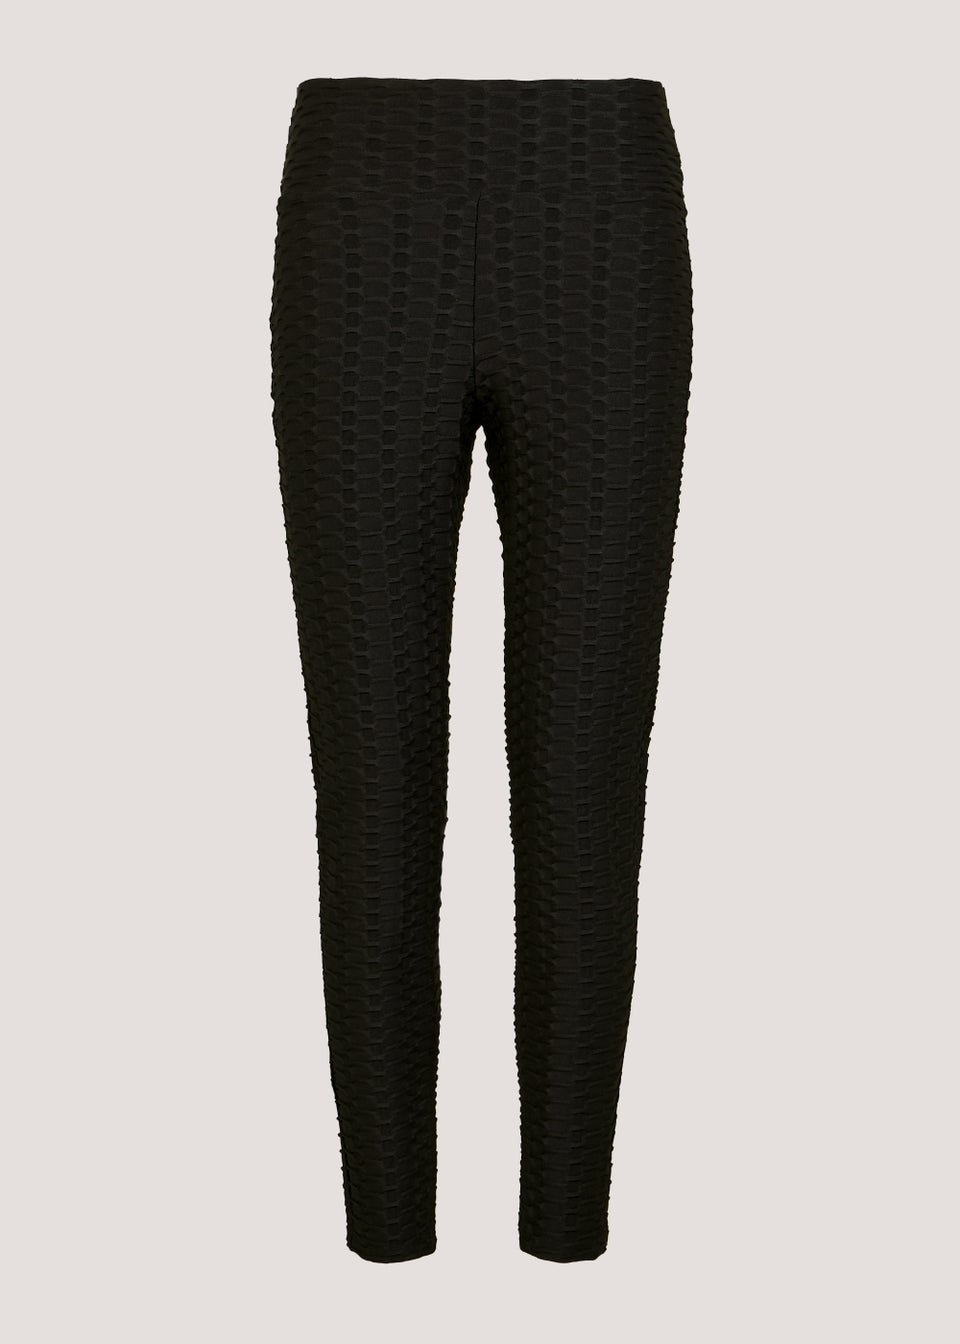 Souluxe Black Ruched Sports Leggings